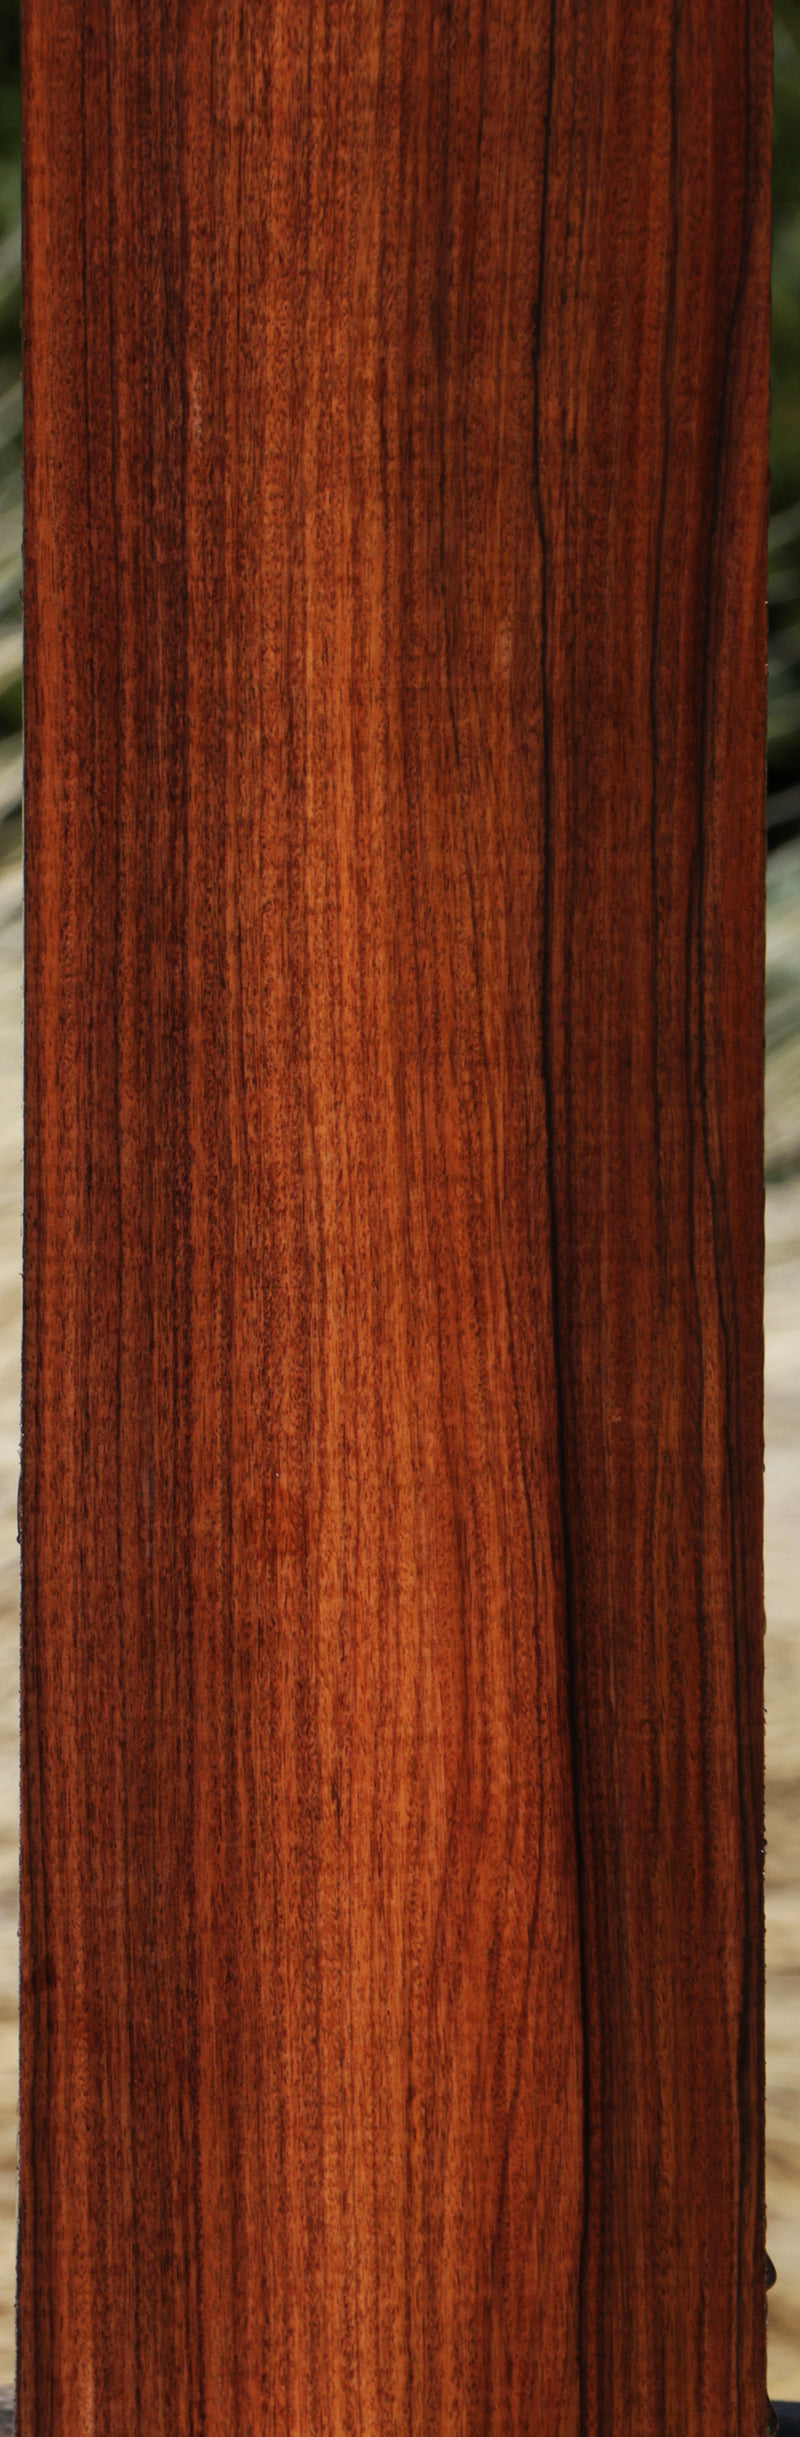 Quilted Bolivian Rosewood Lumber